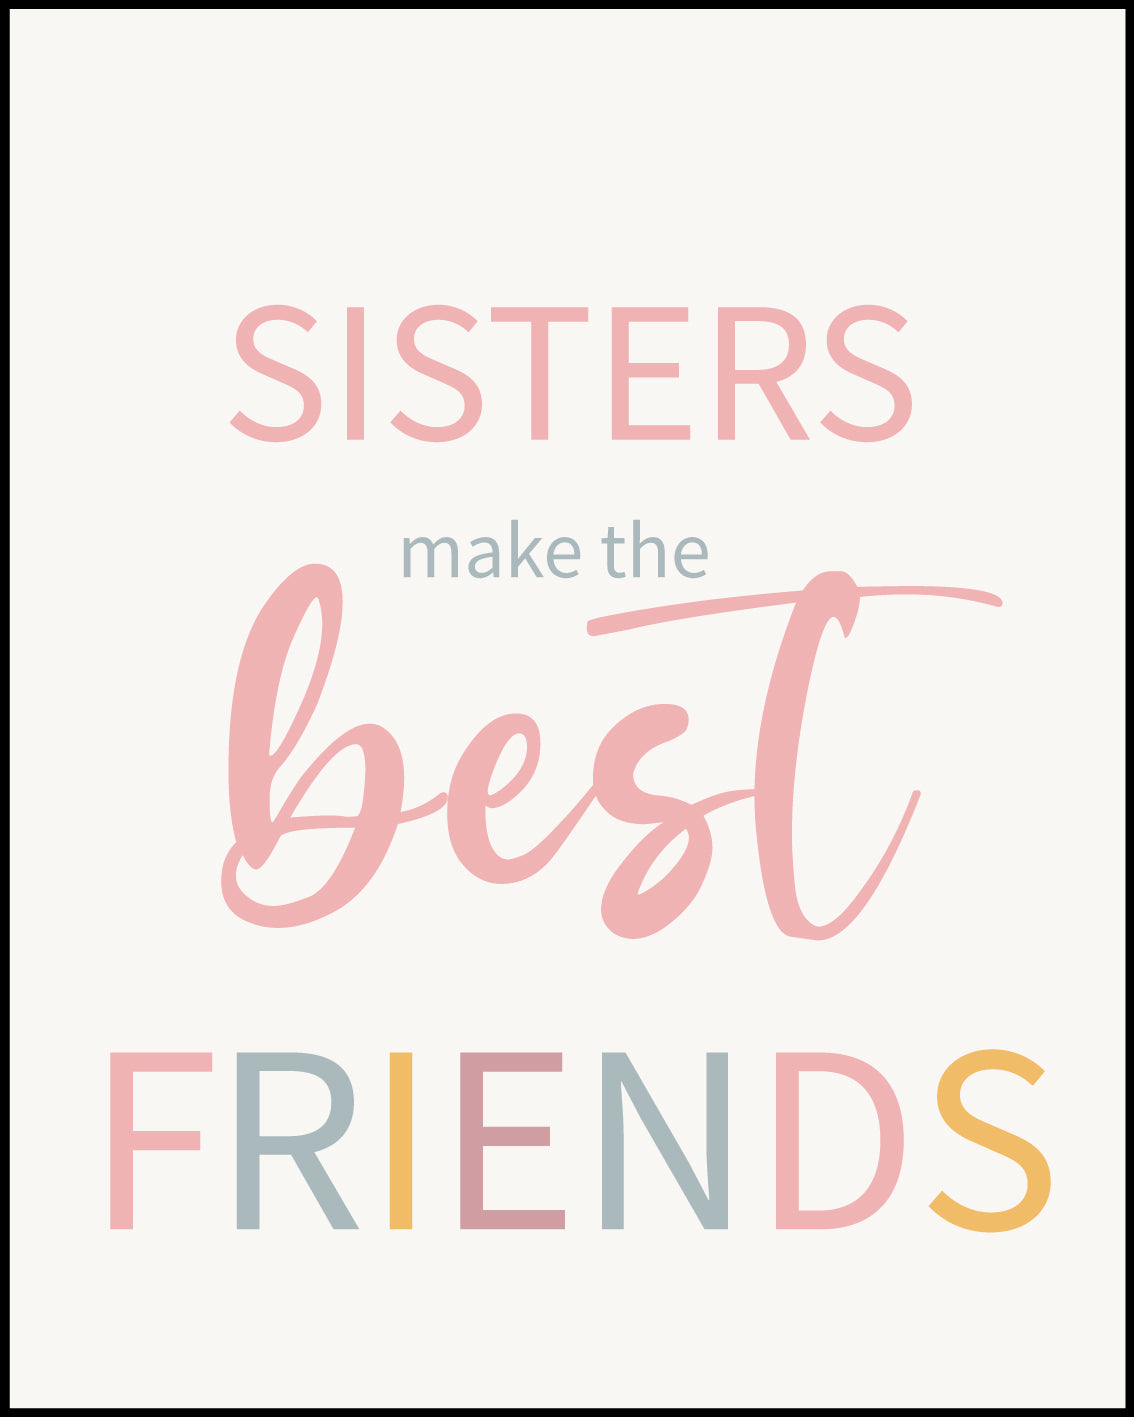 Sister make the best friends, set of 3 nursery Posters personalized names